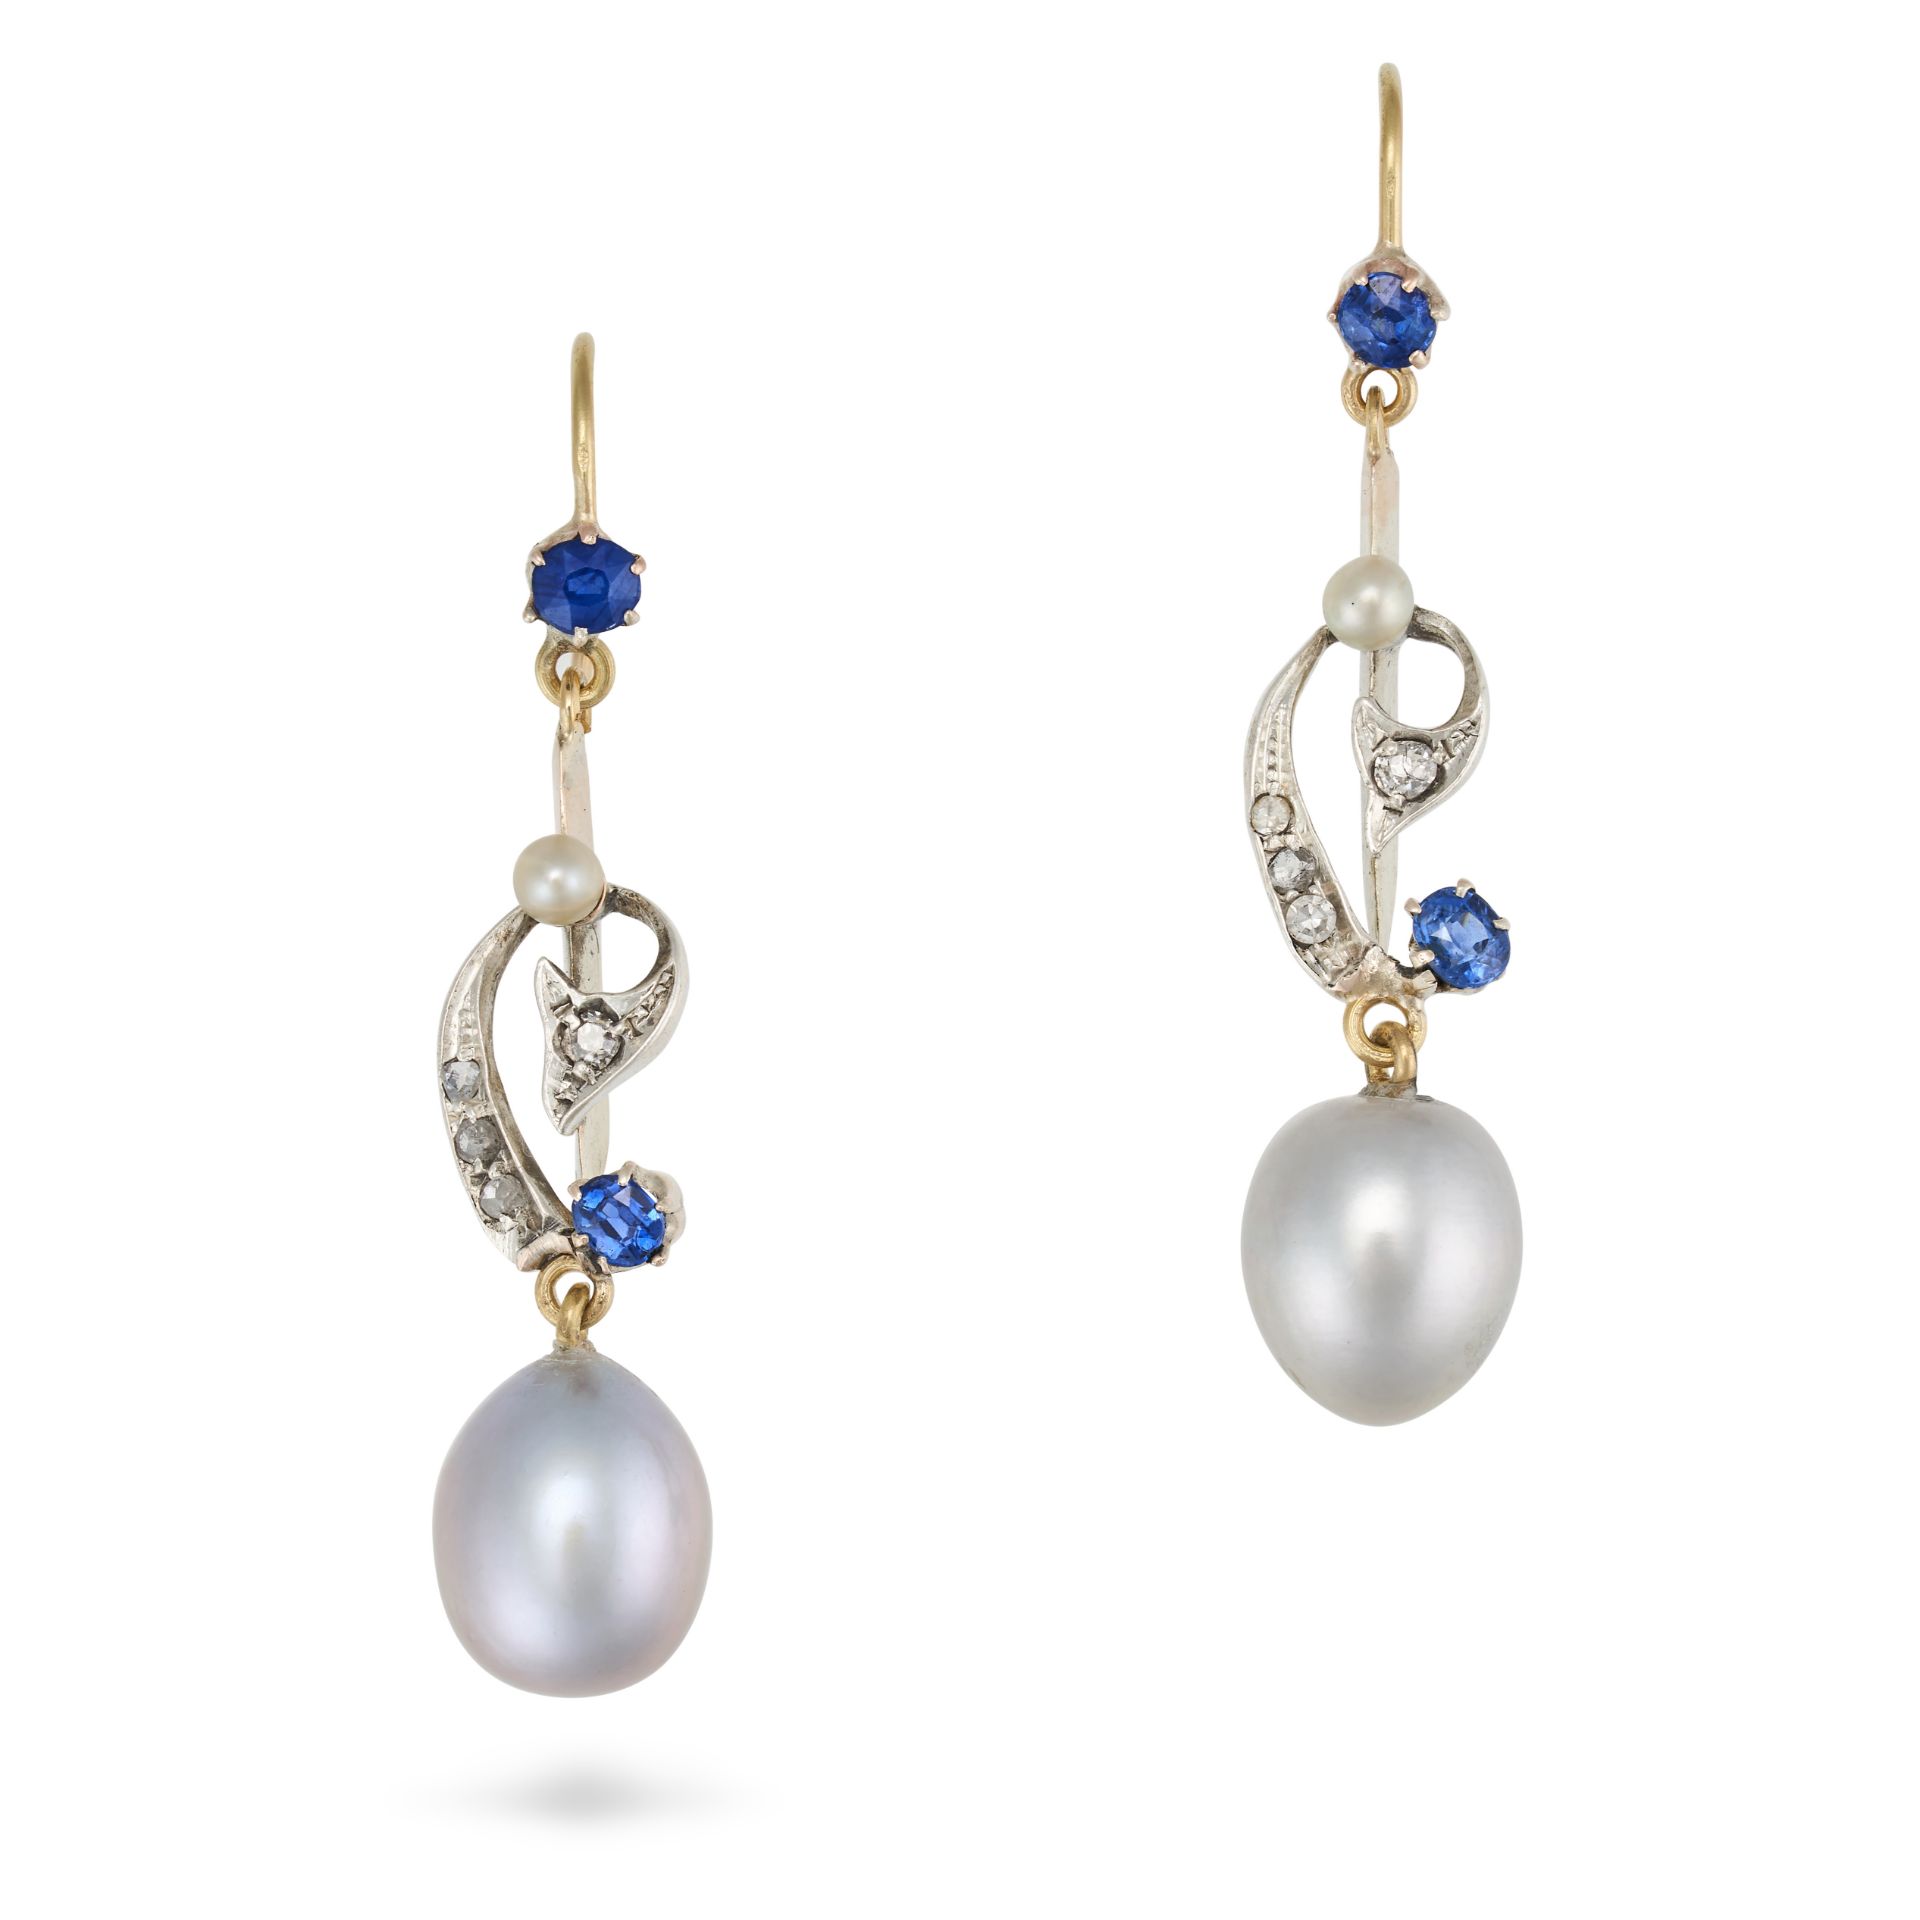 A PAIR OF SAPPHIRE, DIAMOND AND PEARL DROP EARRINGS each in a scrolling design set with single cu...